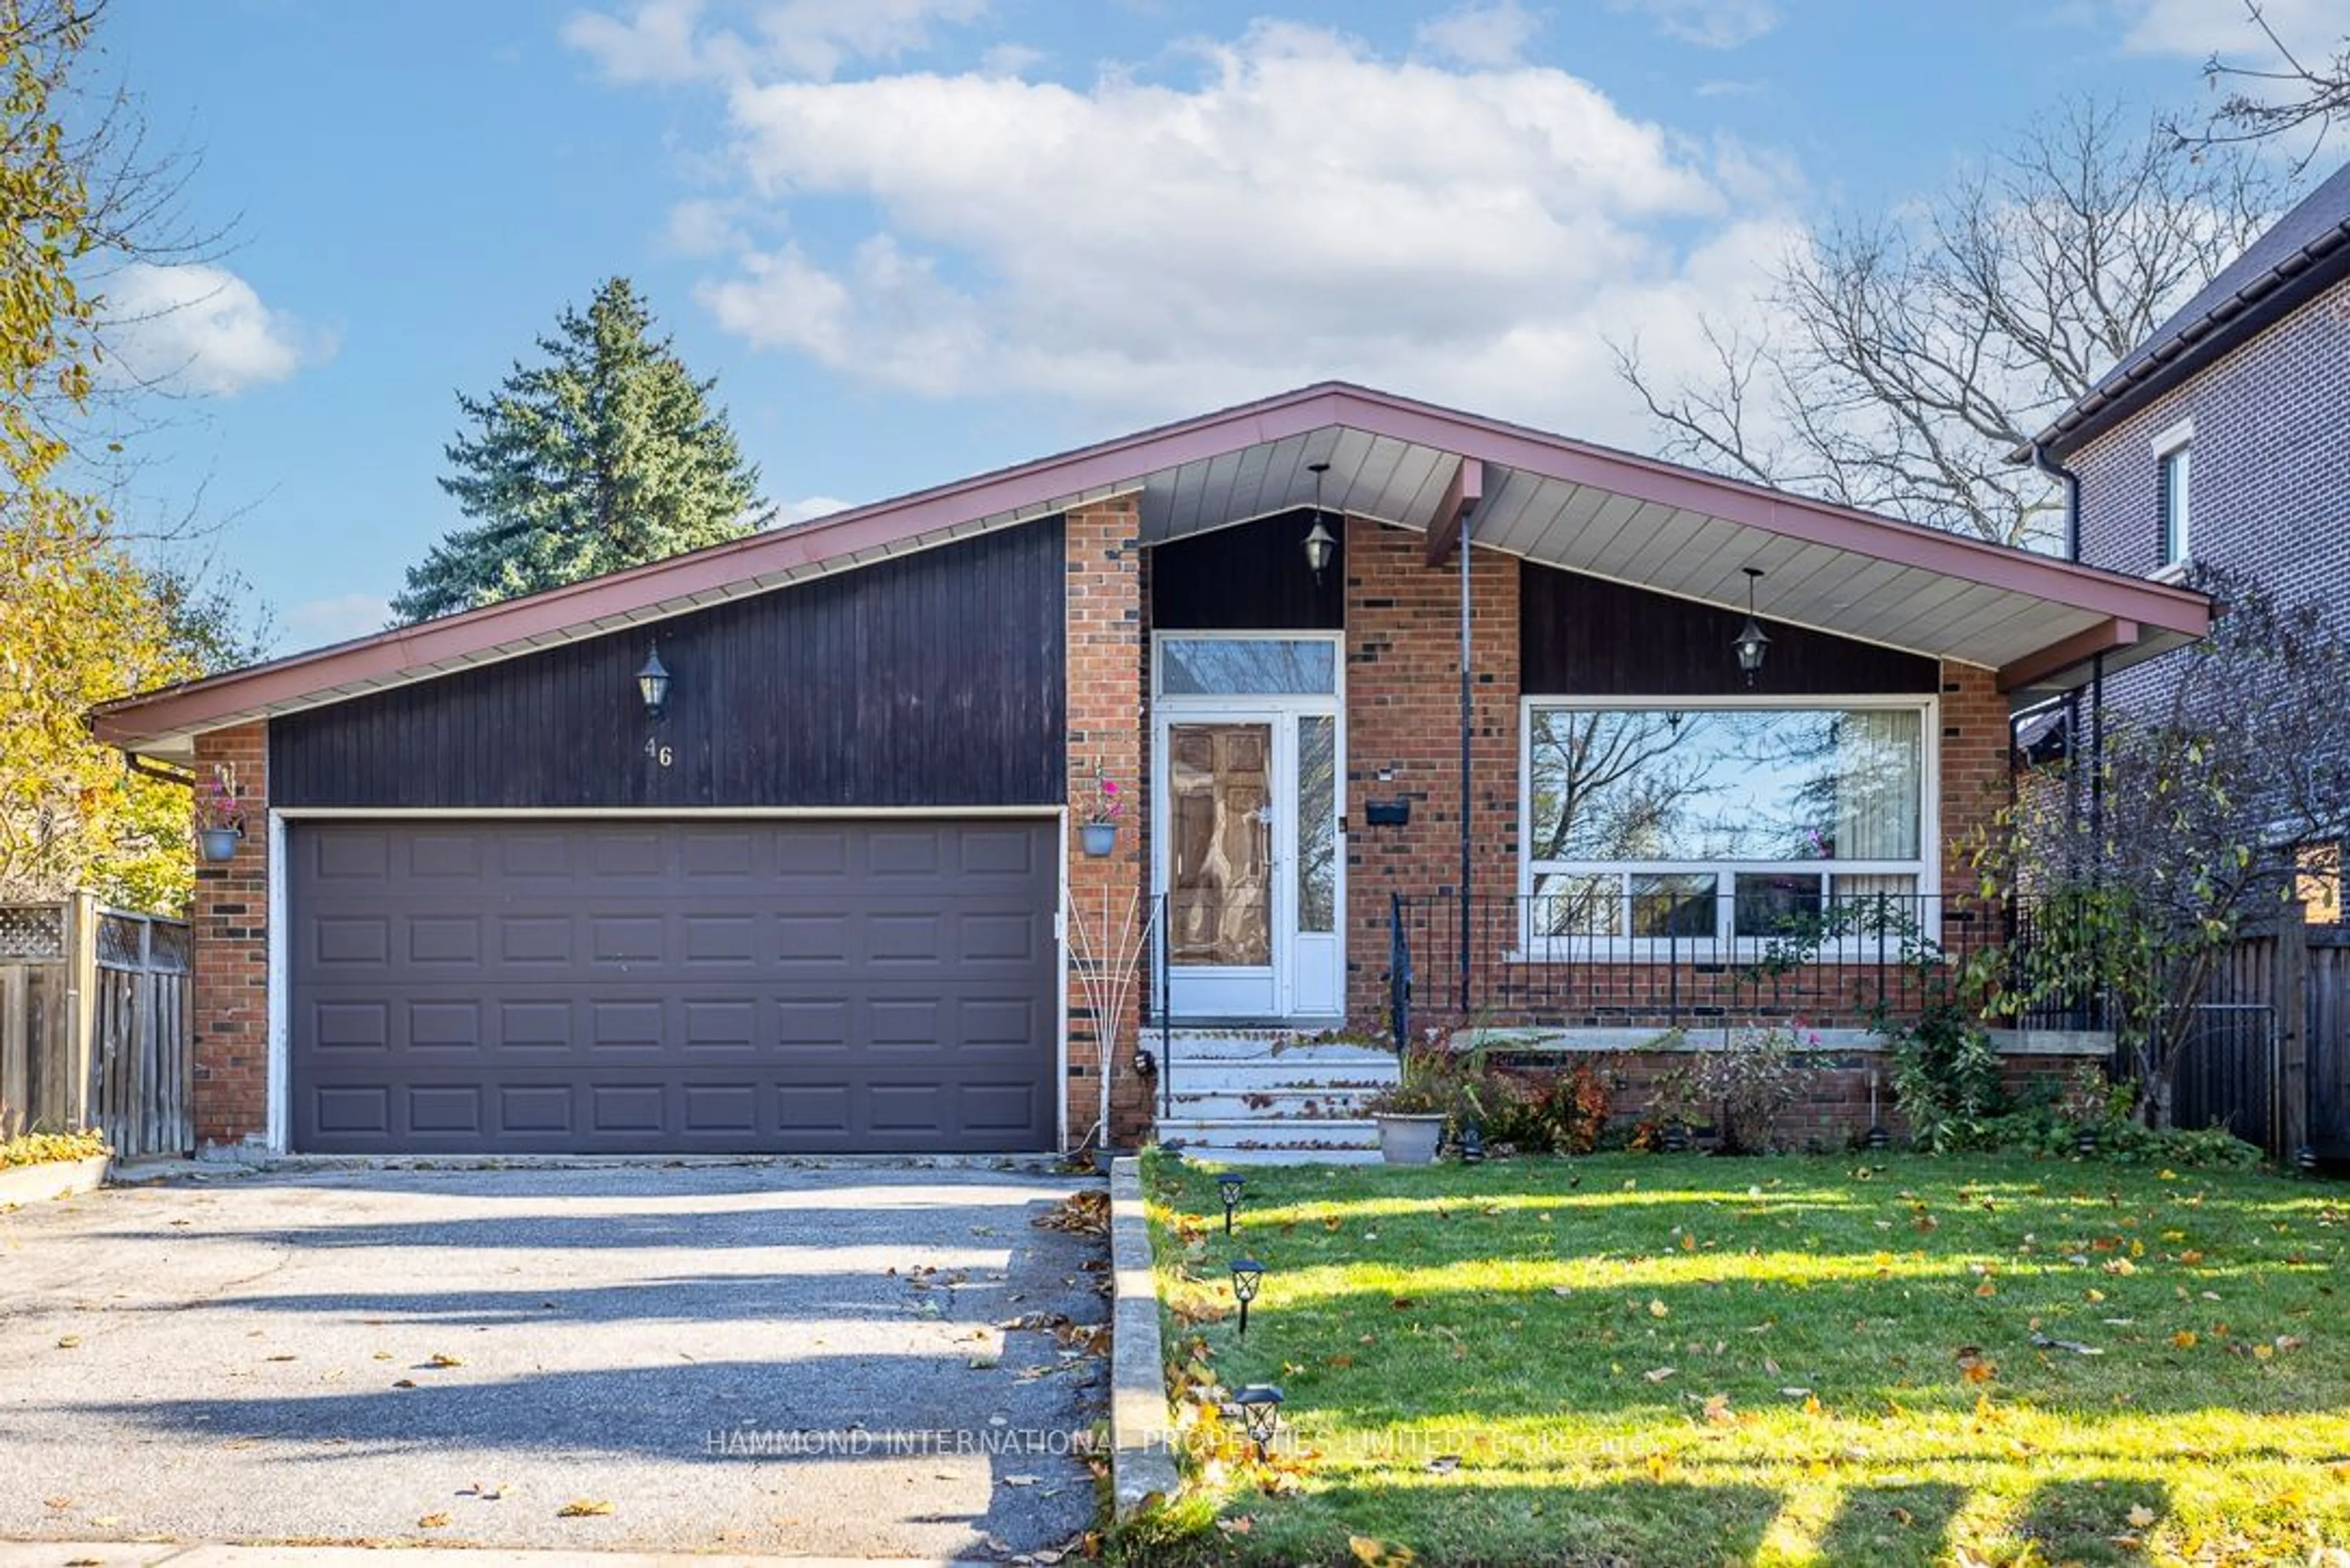 Home with brick exterior material for 46 Sunnywood Cres, Richmond Hill Ontario L4C 6W3